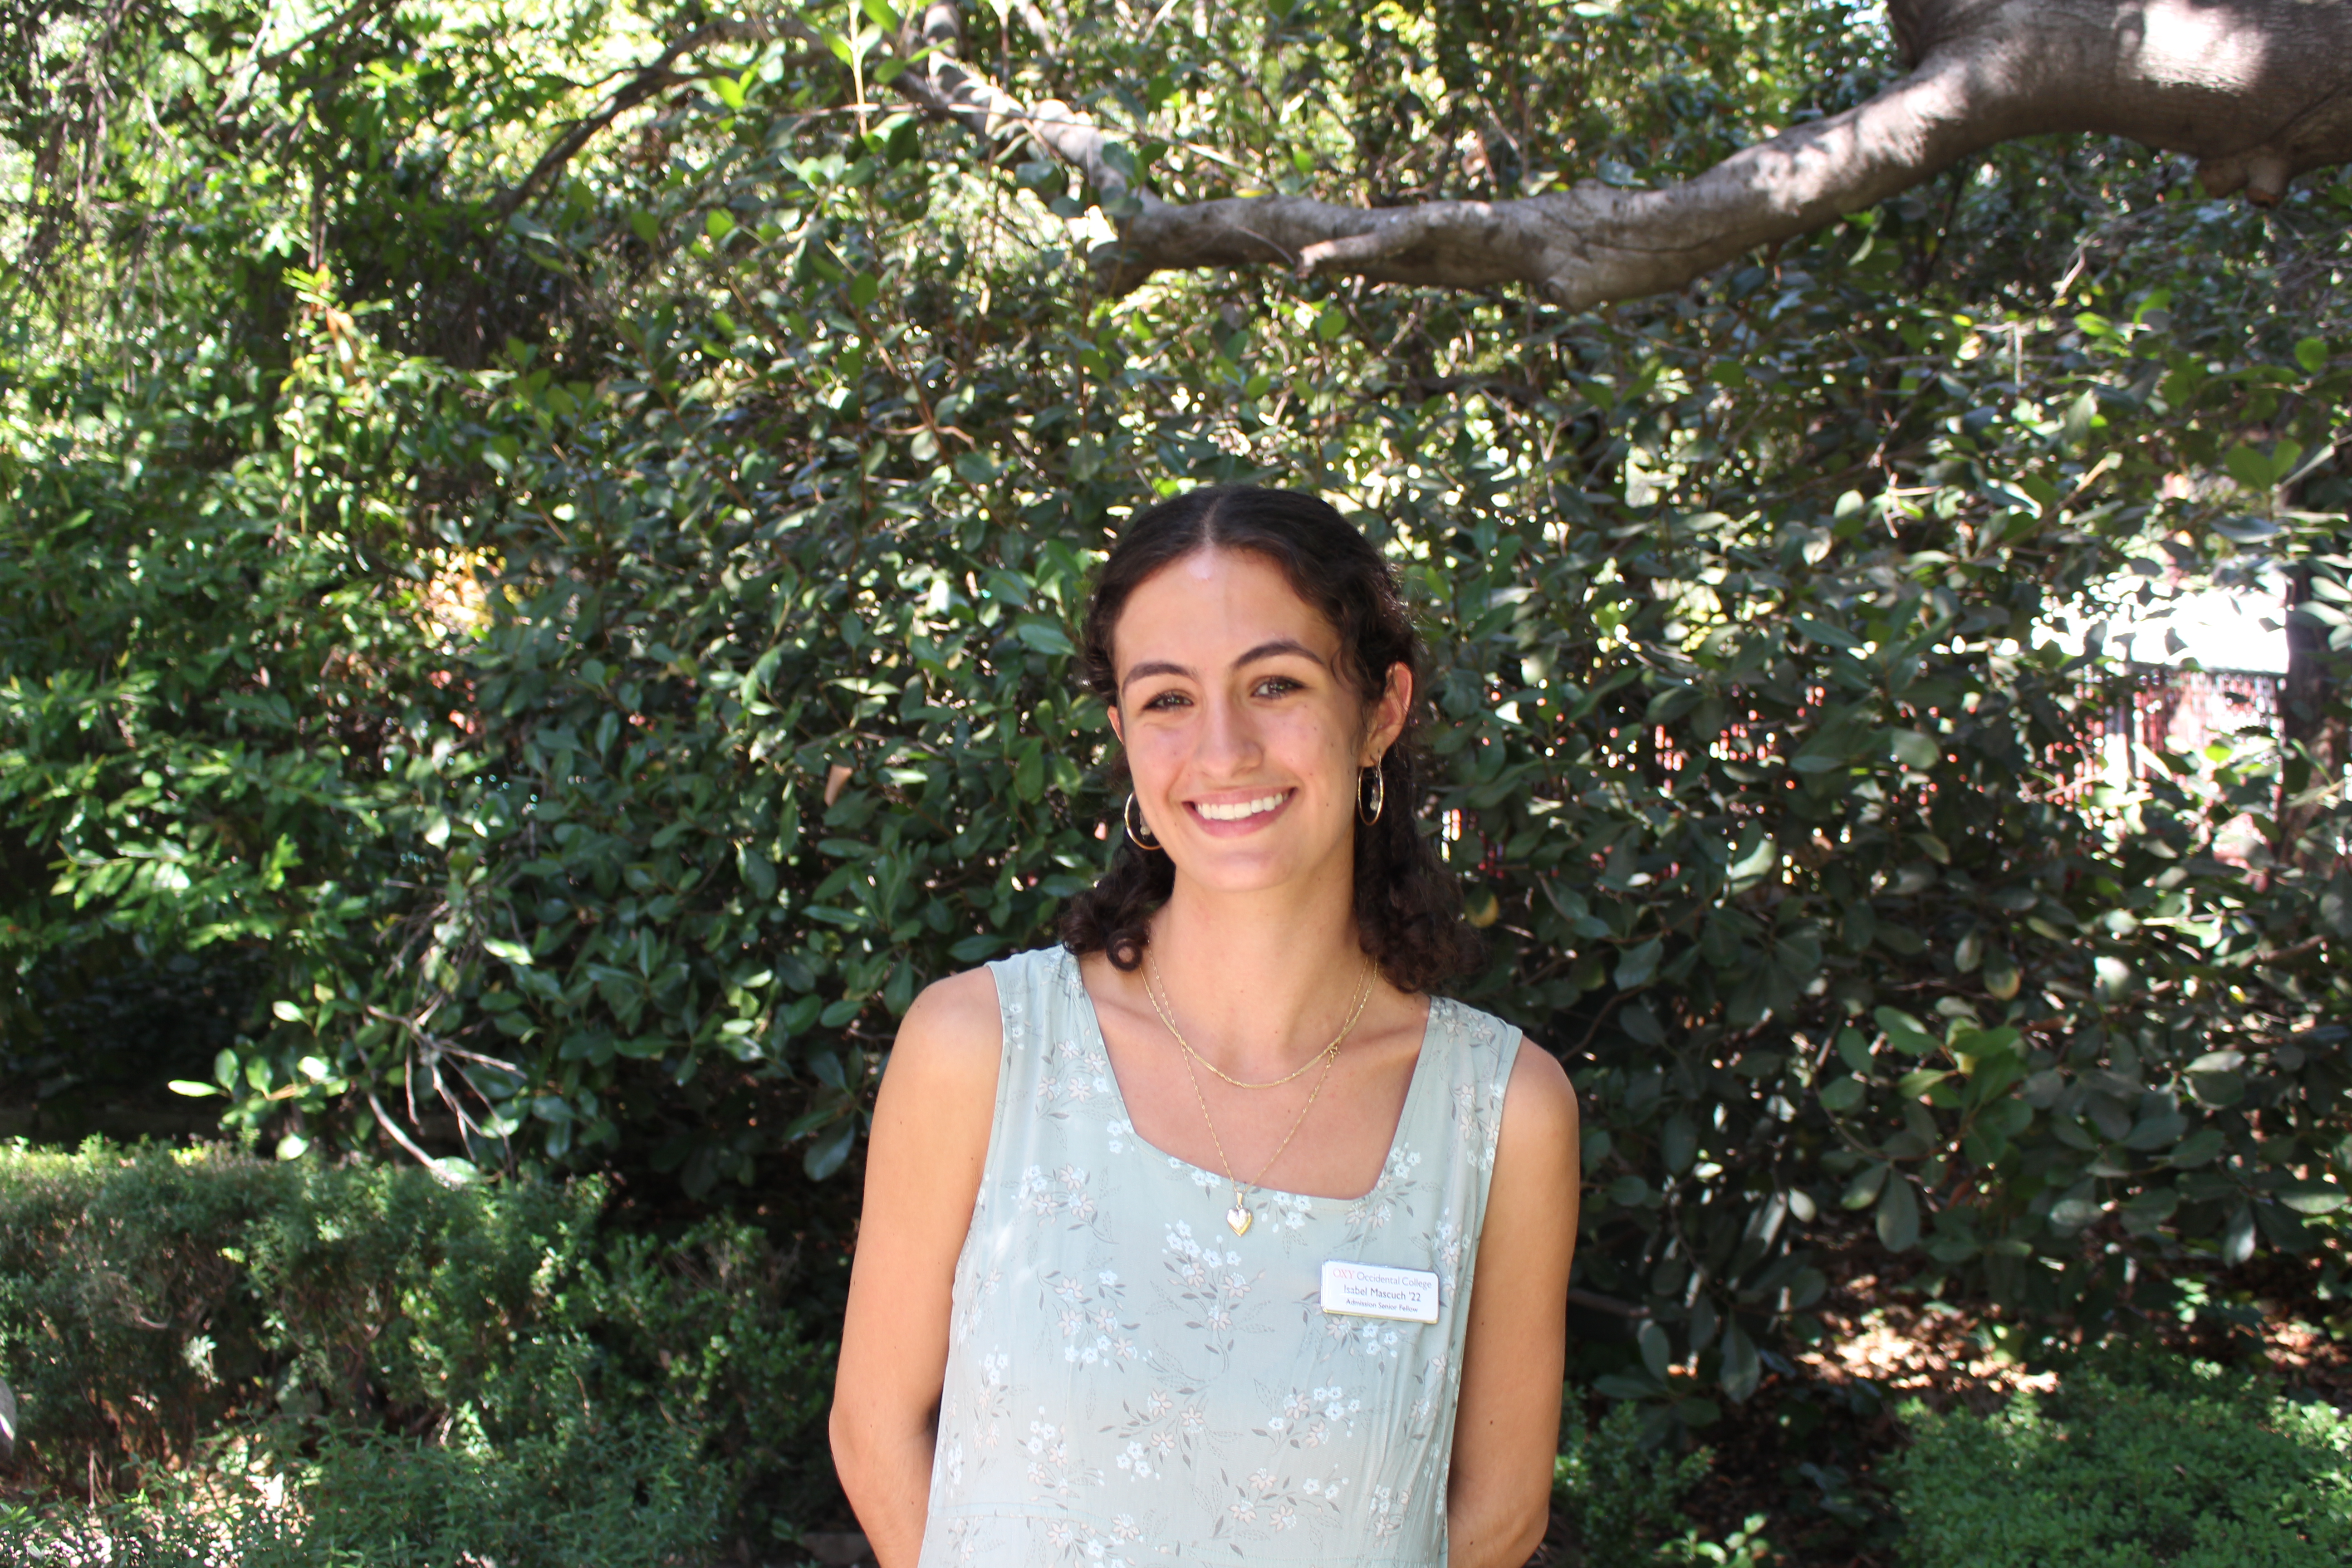 Isabel smiles, wearing a blue tank top and name tag, with trees in the background